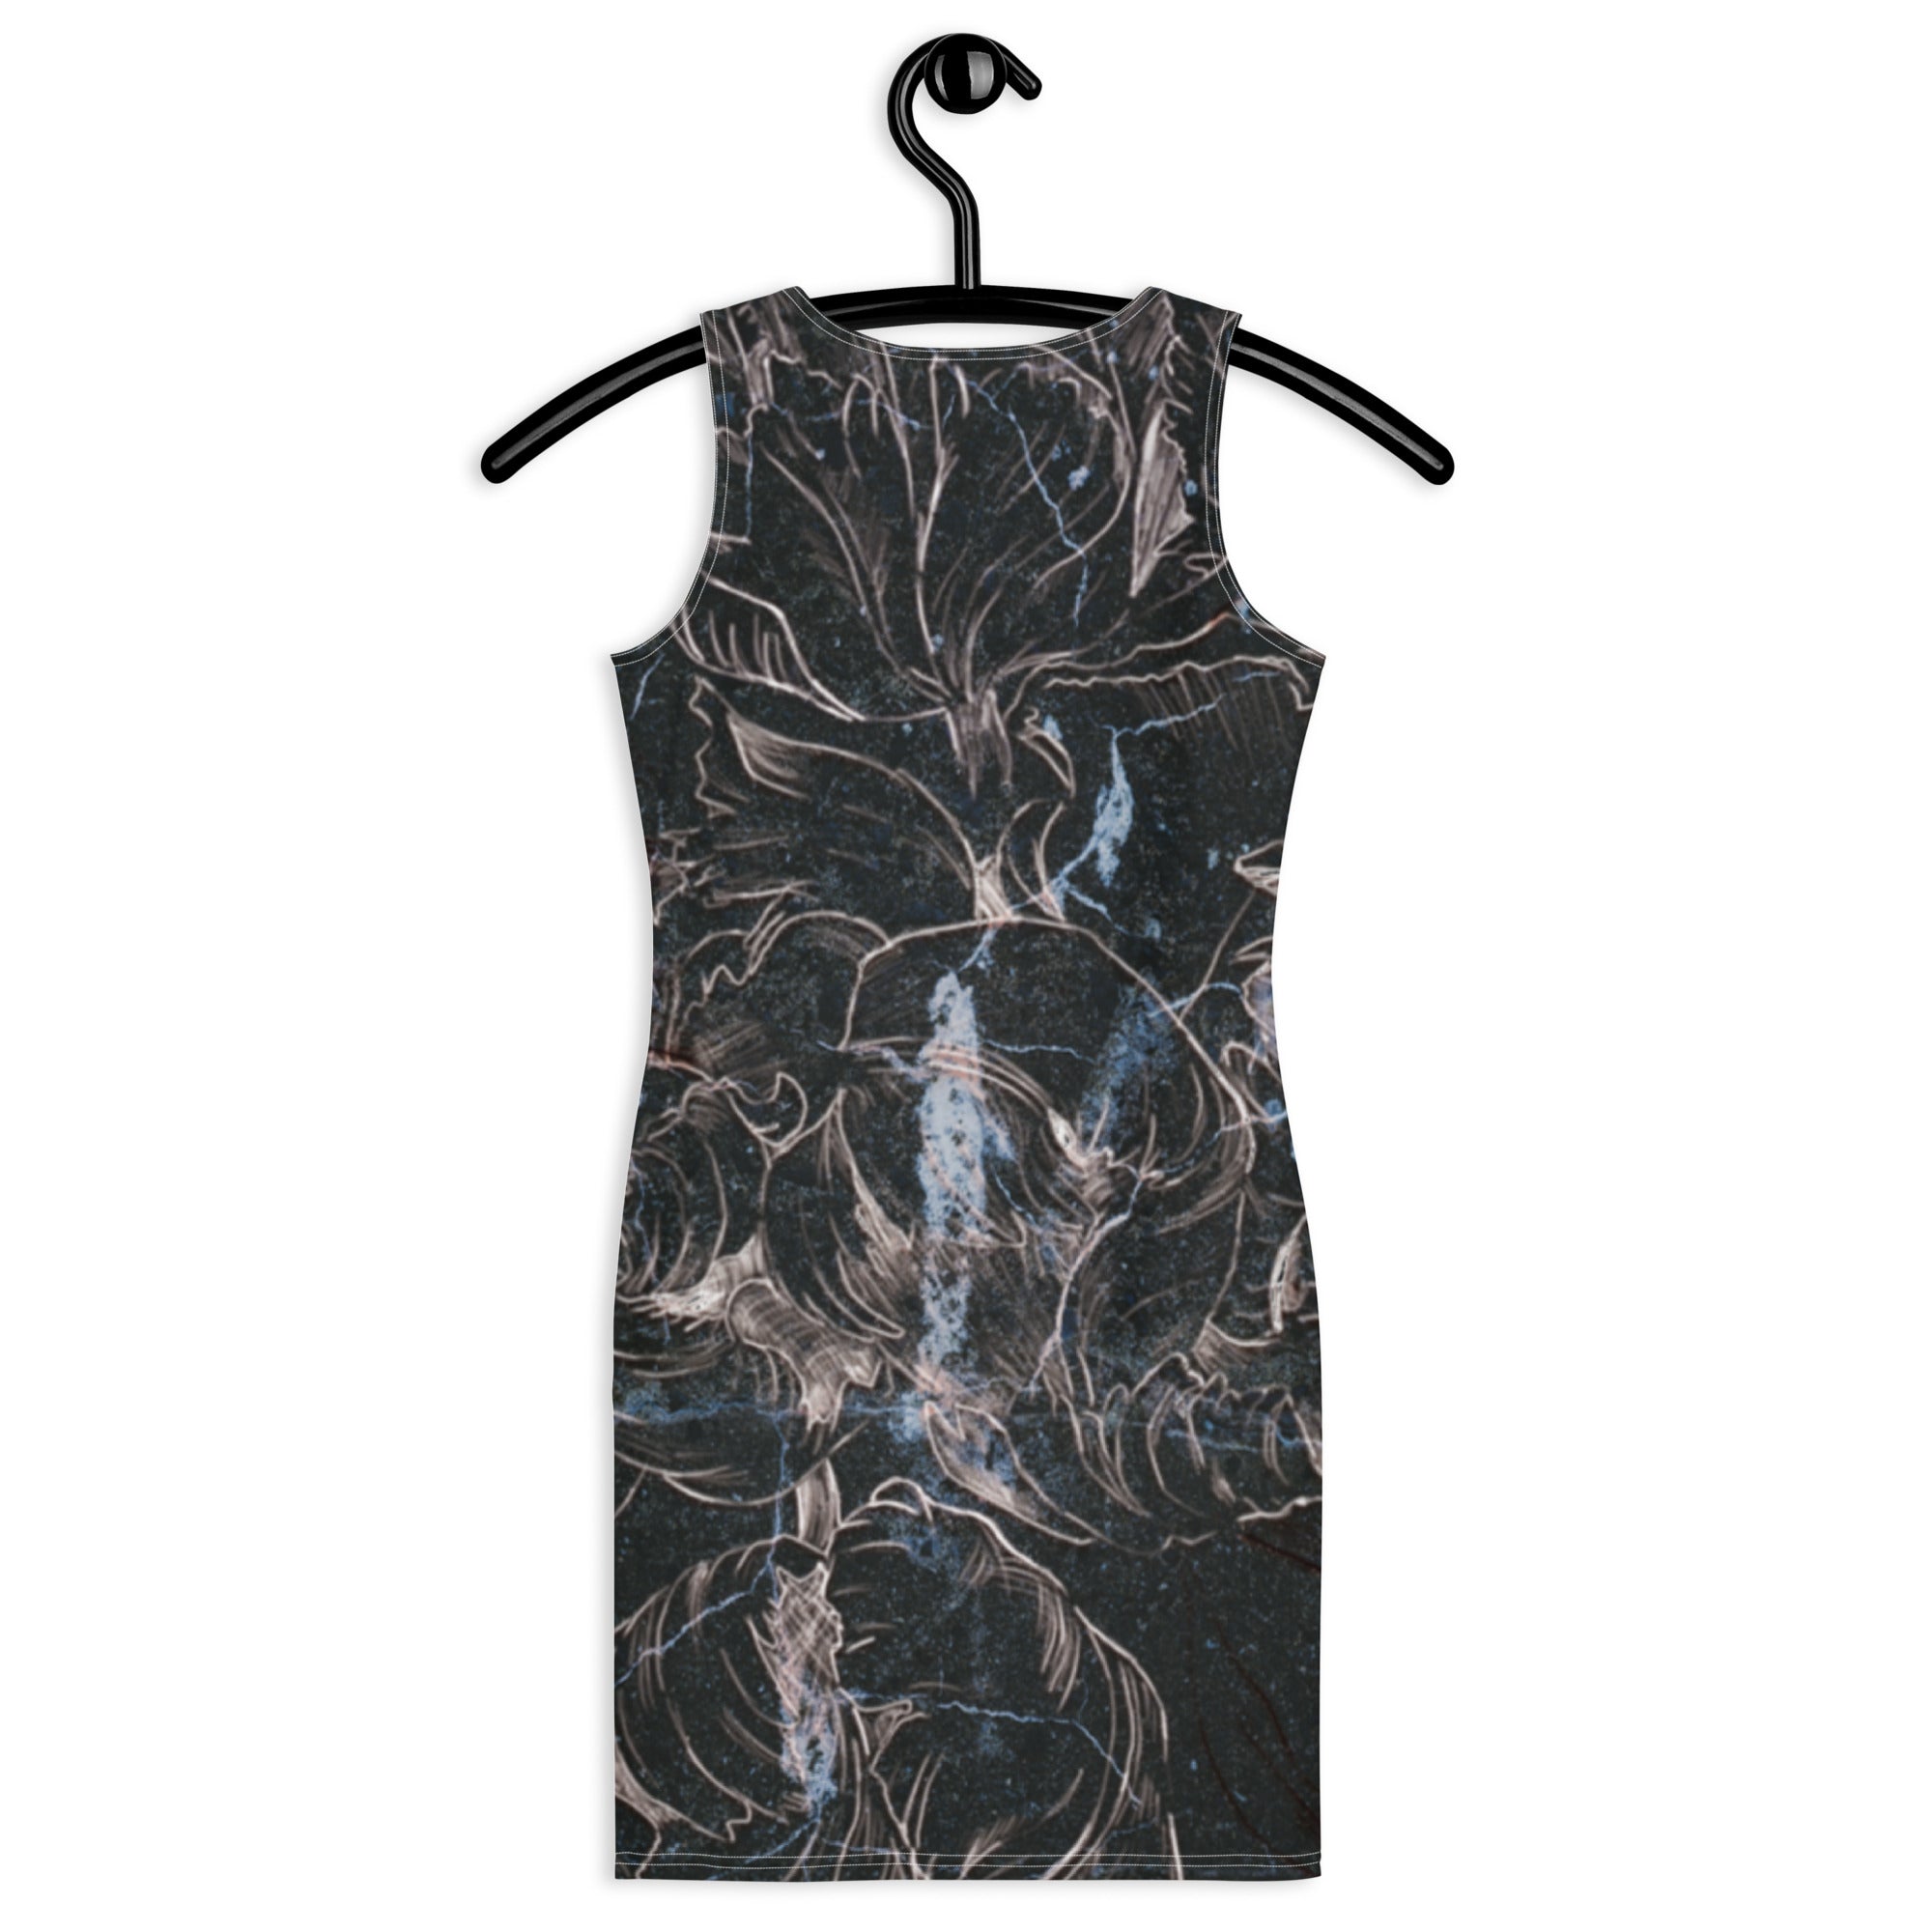 Anacotte Sublimation Cut & Sew Abstract Floral Dress